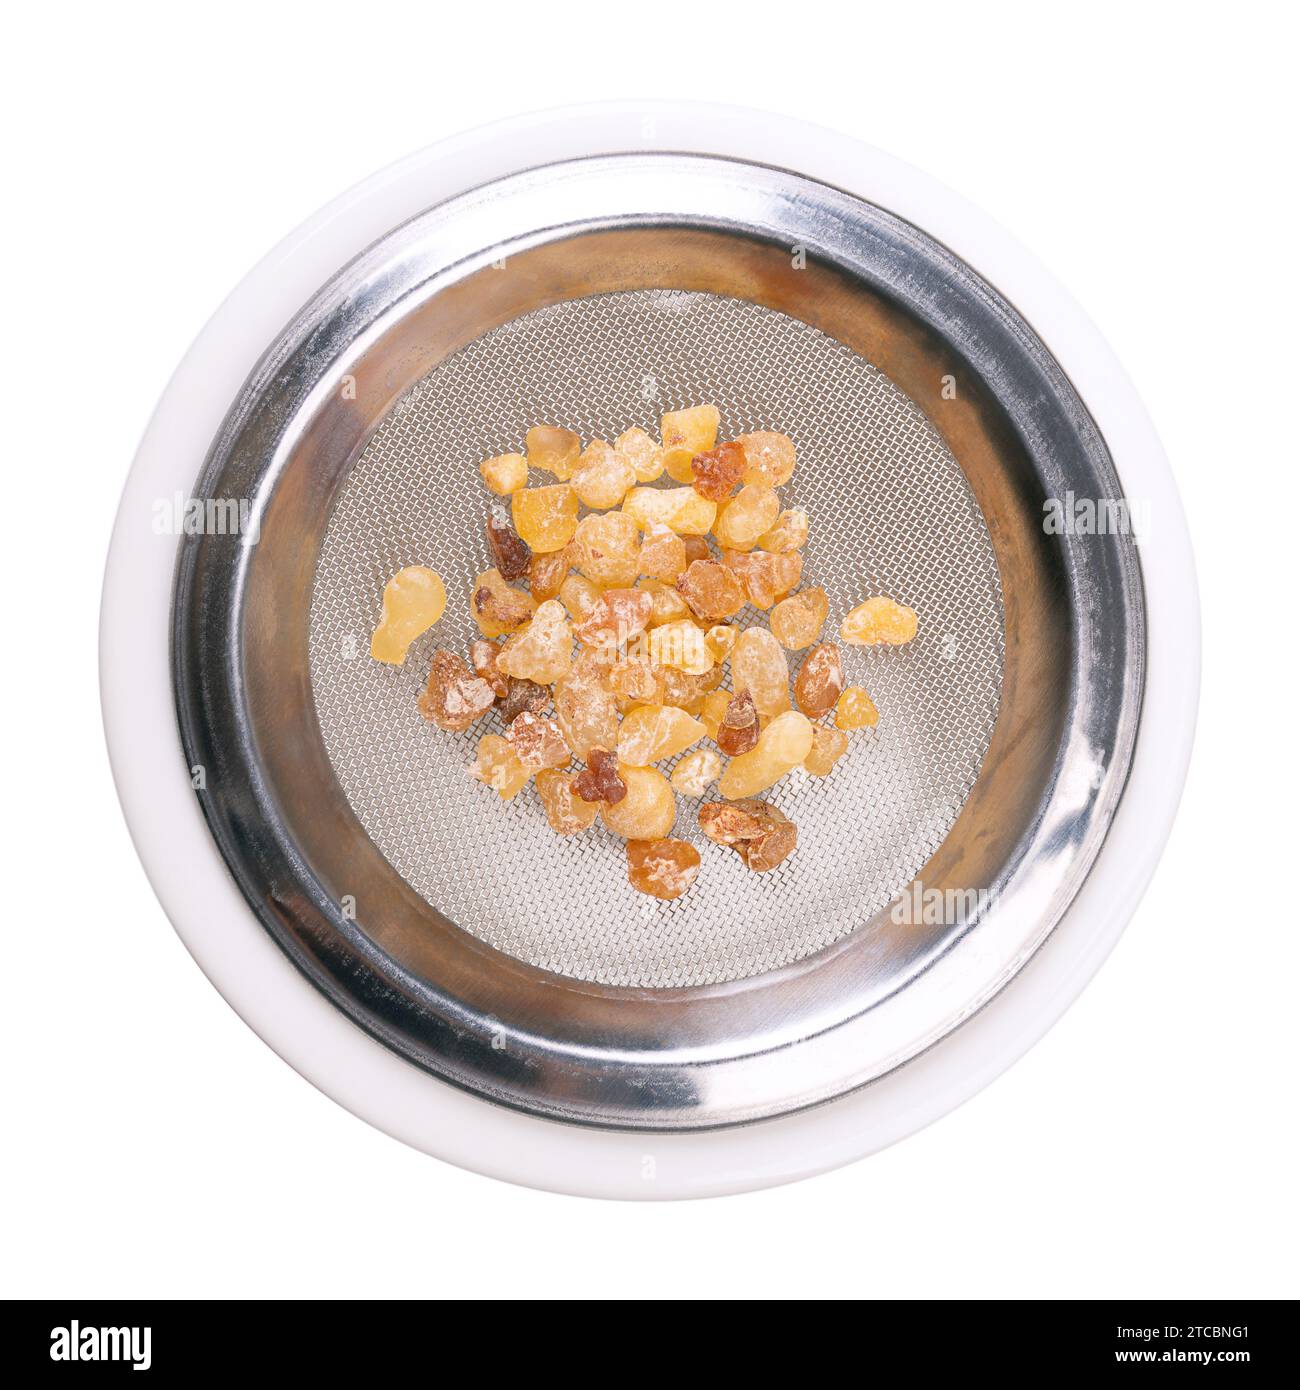 Frankincense on the sieve of an incense burner, from above. Tears or pieces of hardened olibanum resin. Aromatic resin, used in incense and perfumes. Stock Photo